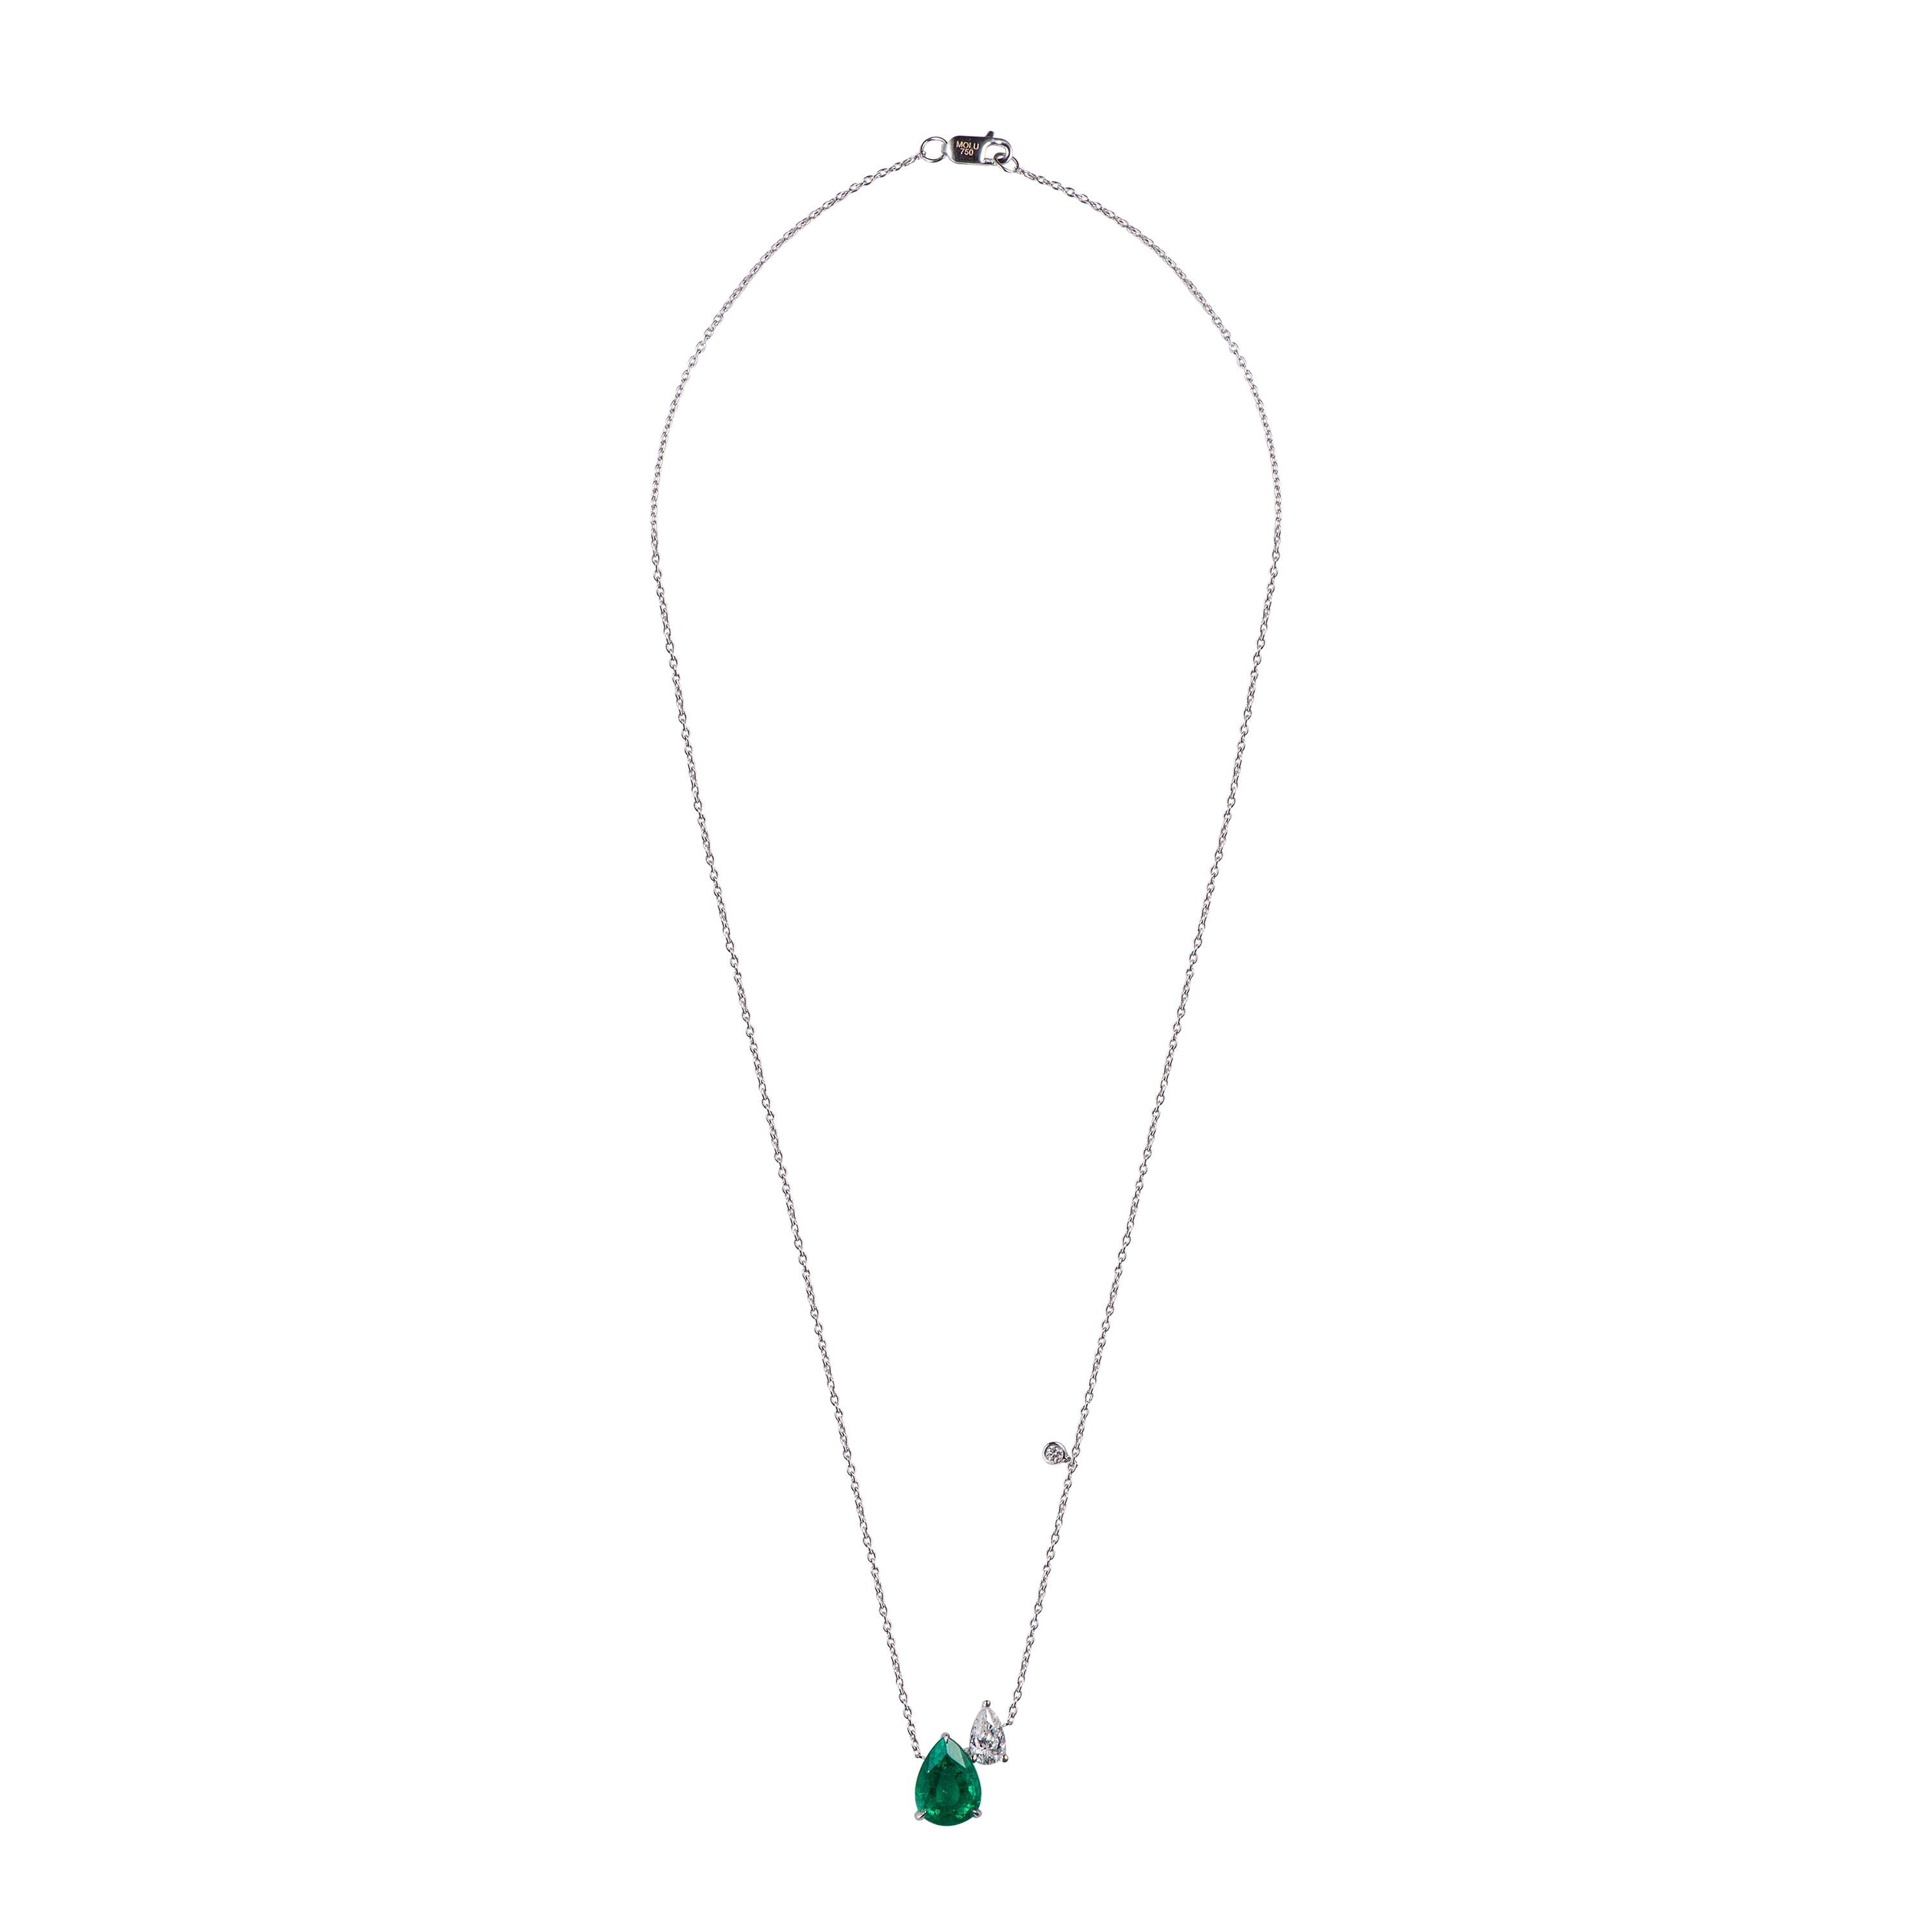 This simple and elegant necklace features a pear shaped faceted emerald as the center stone and an assymetrically set pear shaped dimaond accents the emerald. The little round brilliant diamond hanging from the chain adds a little extra brilliance